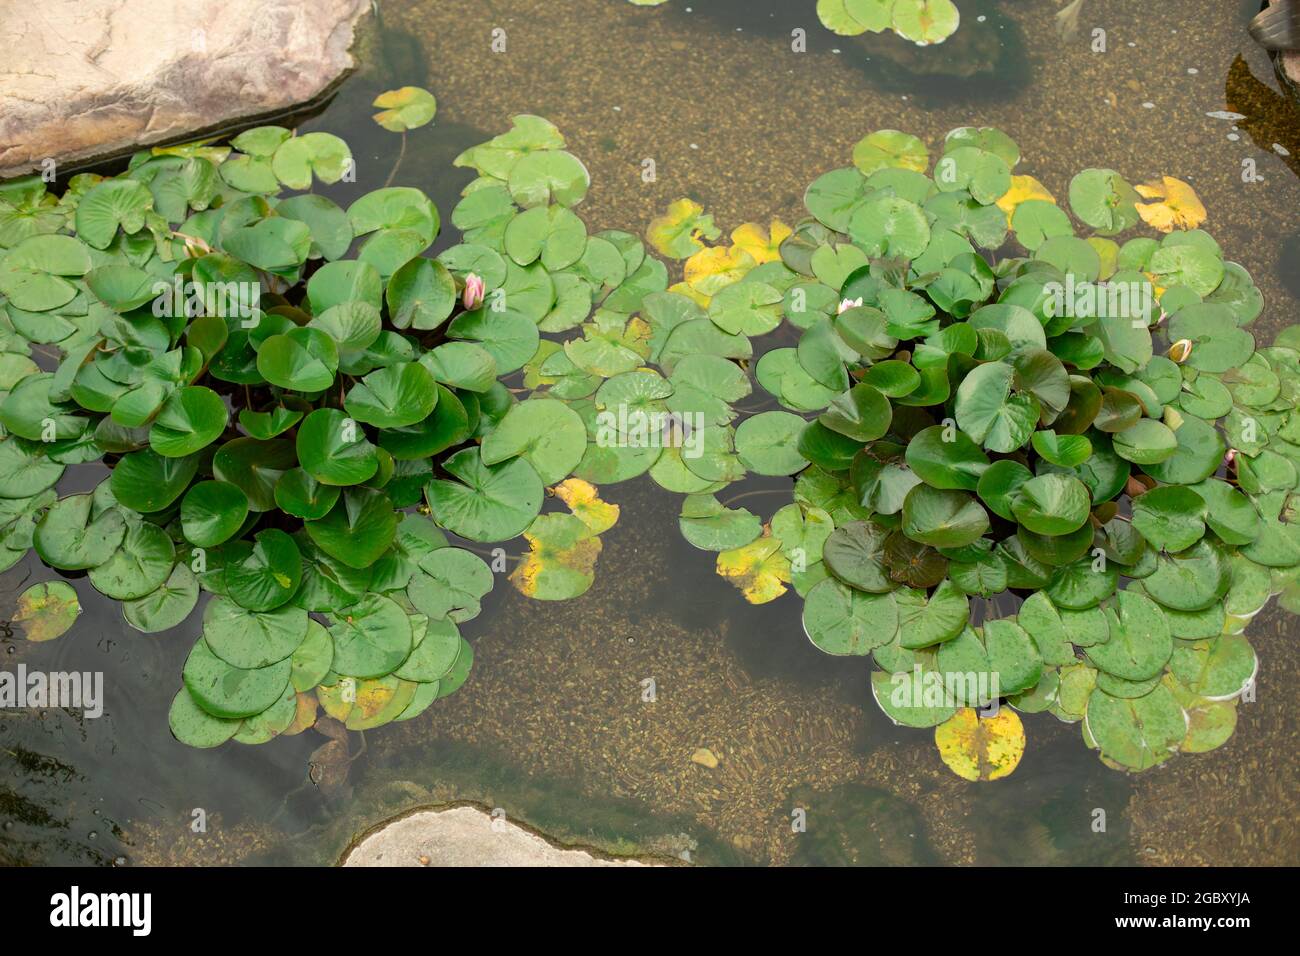 Plants in an artificial pond. Swamp plants on the water. Water